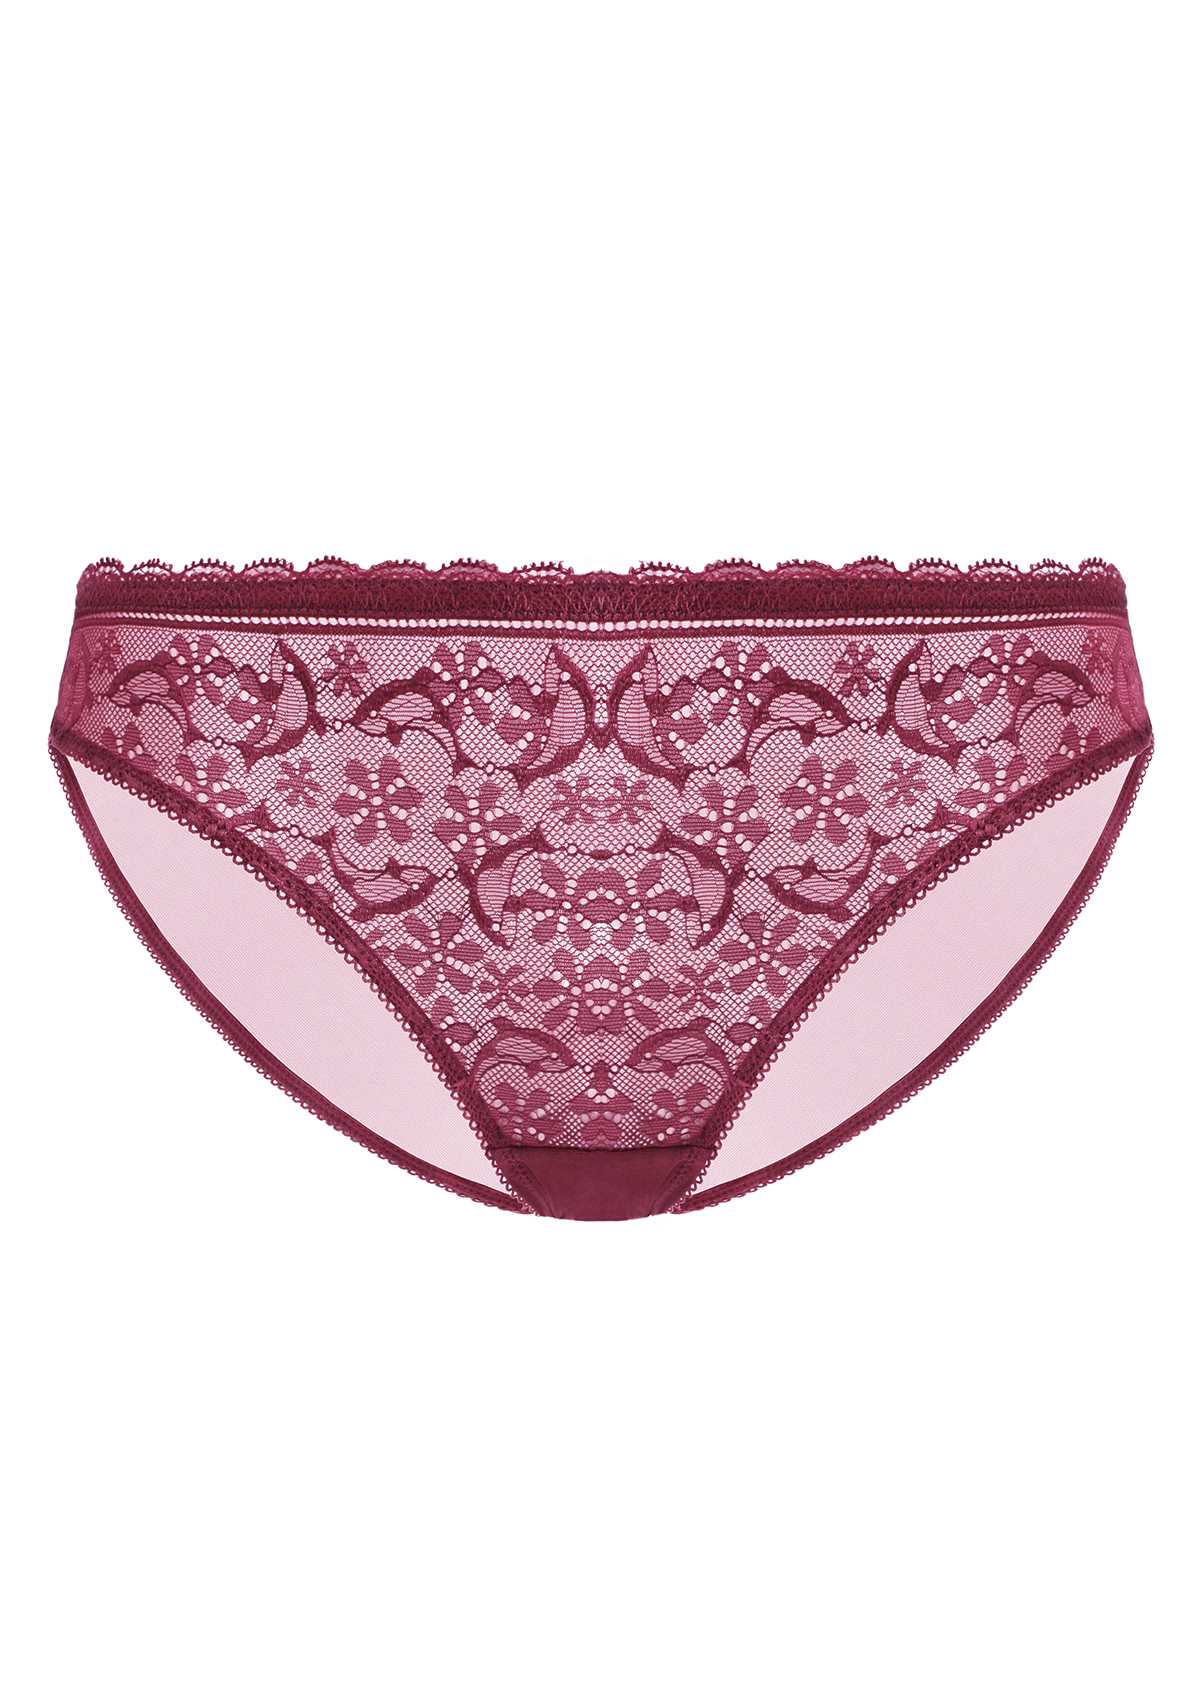 HSIA Anemone Lace Dolphin-Patterned Front And Mesh Back Panties-3 Pack - M / Black+Burgundy+White